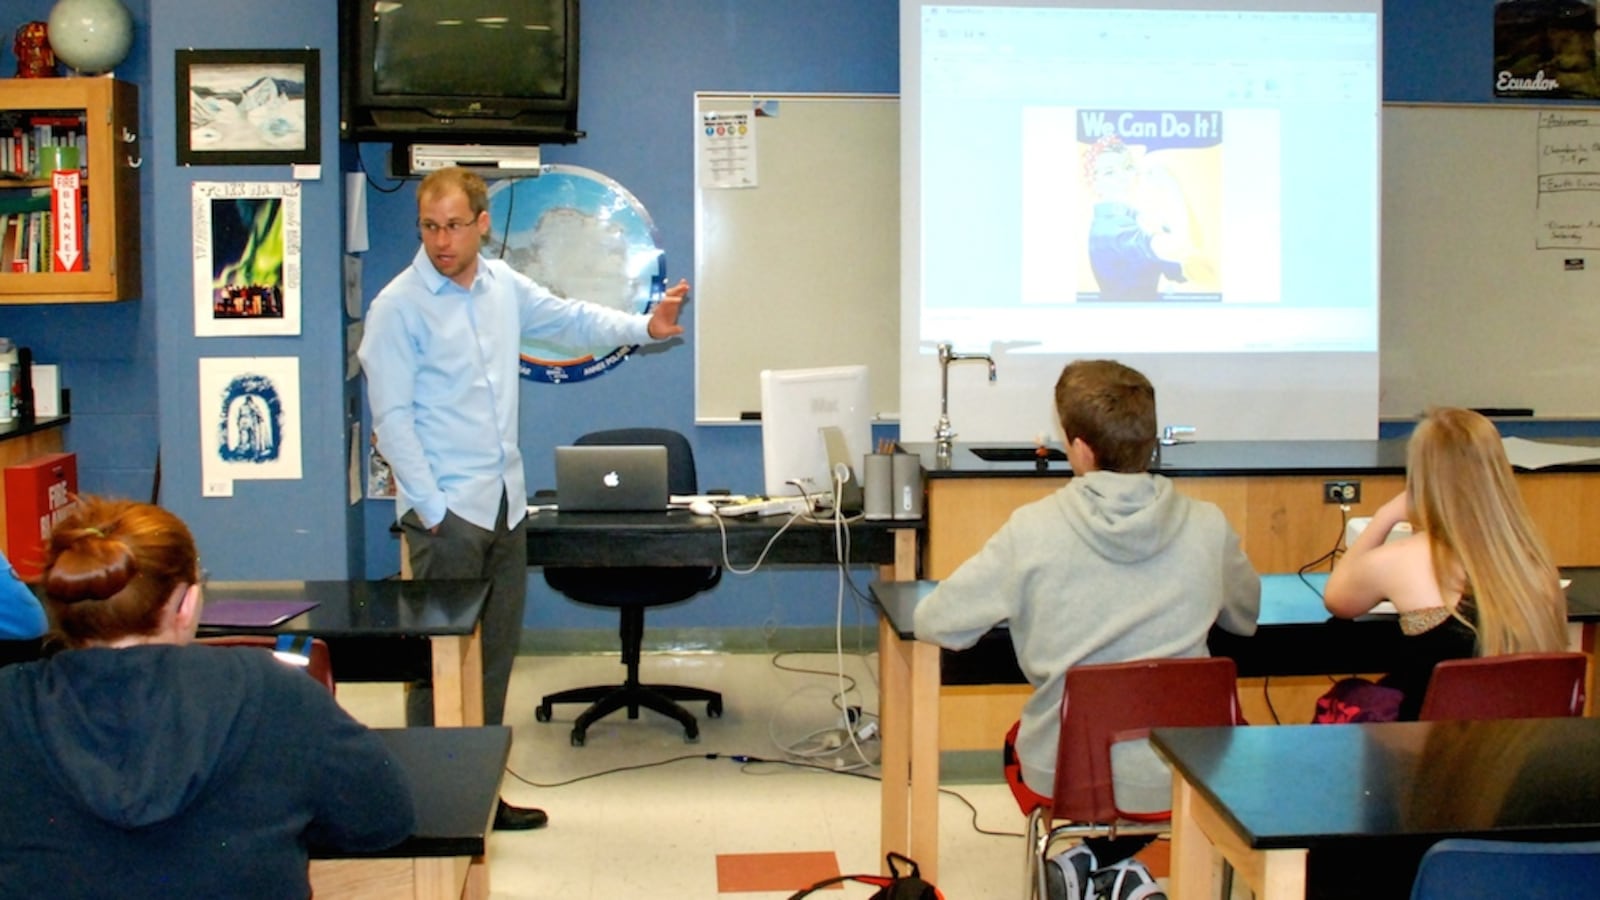 Highlands Ranch High School science teacher Bob MacArthur leads a class discussion May 16 on propaganda art. His ninth grade science class was asked to design a propaganda poster in support of an energy source they have been studying.